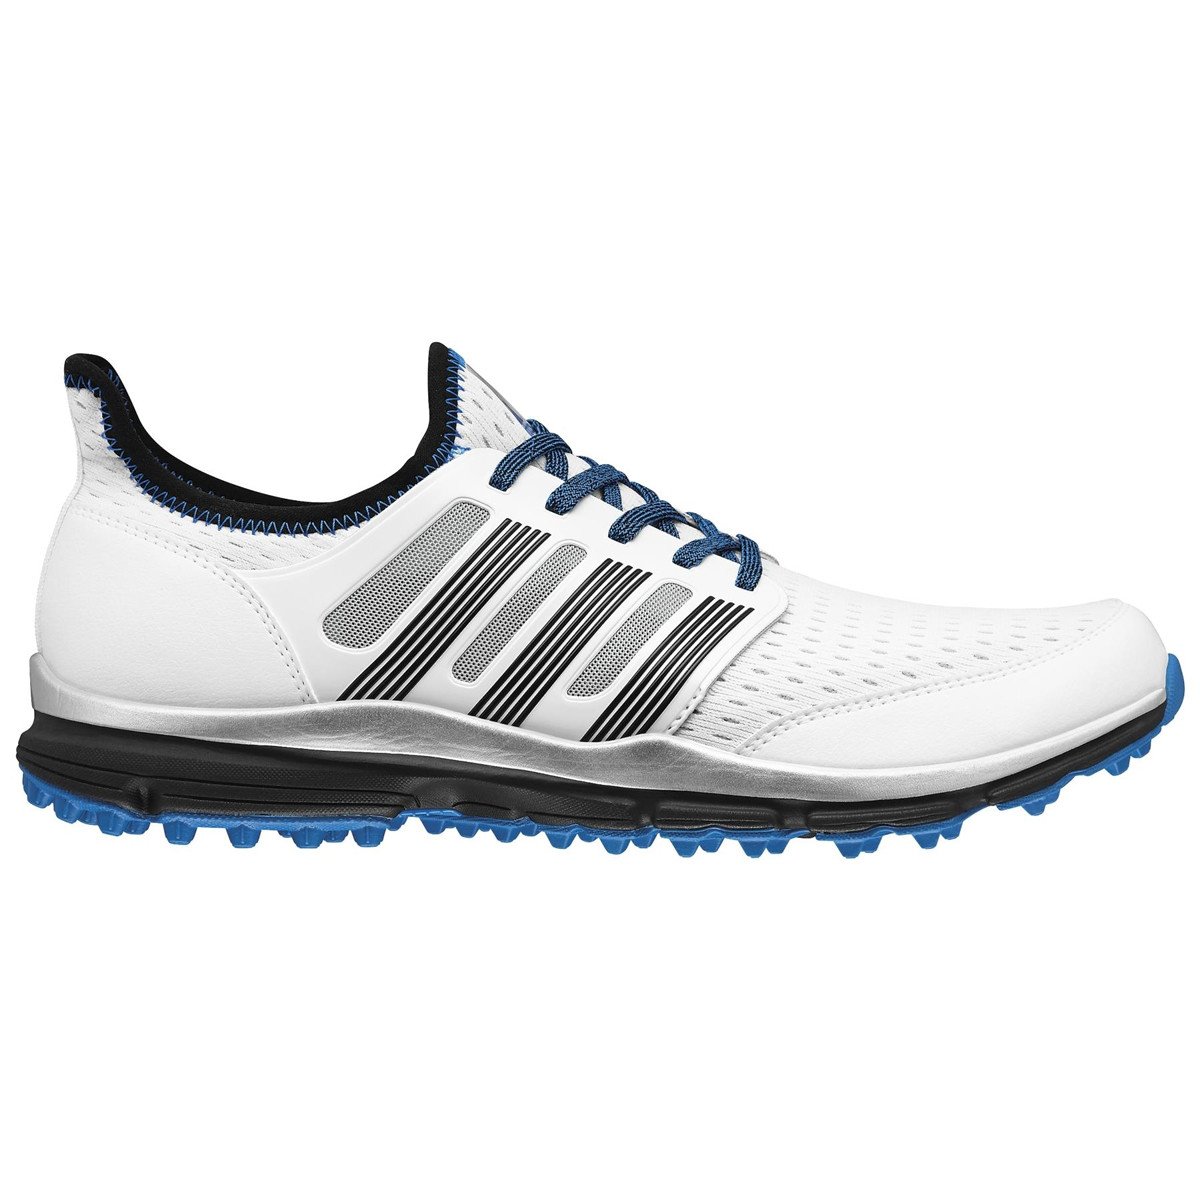 Adidas Climacool Golf Shoes - Discount 